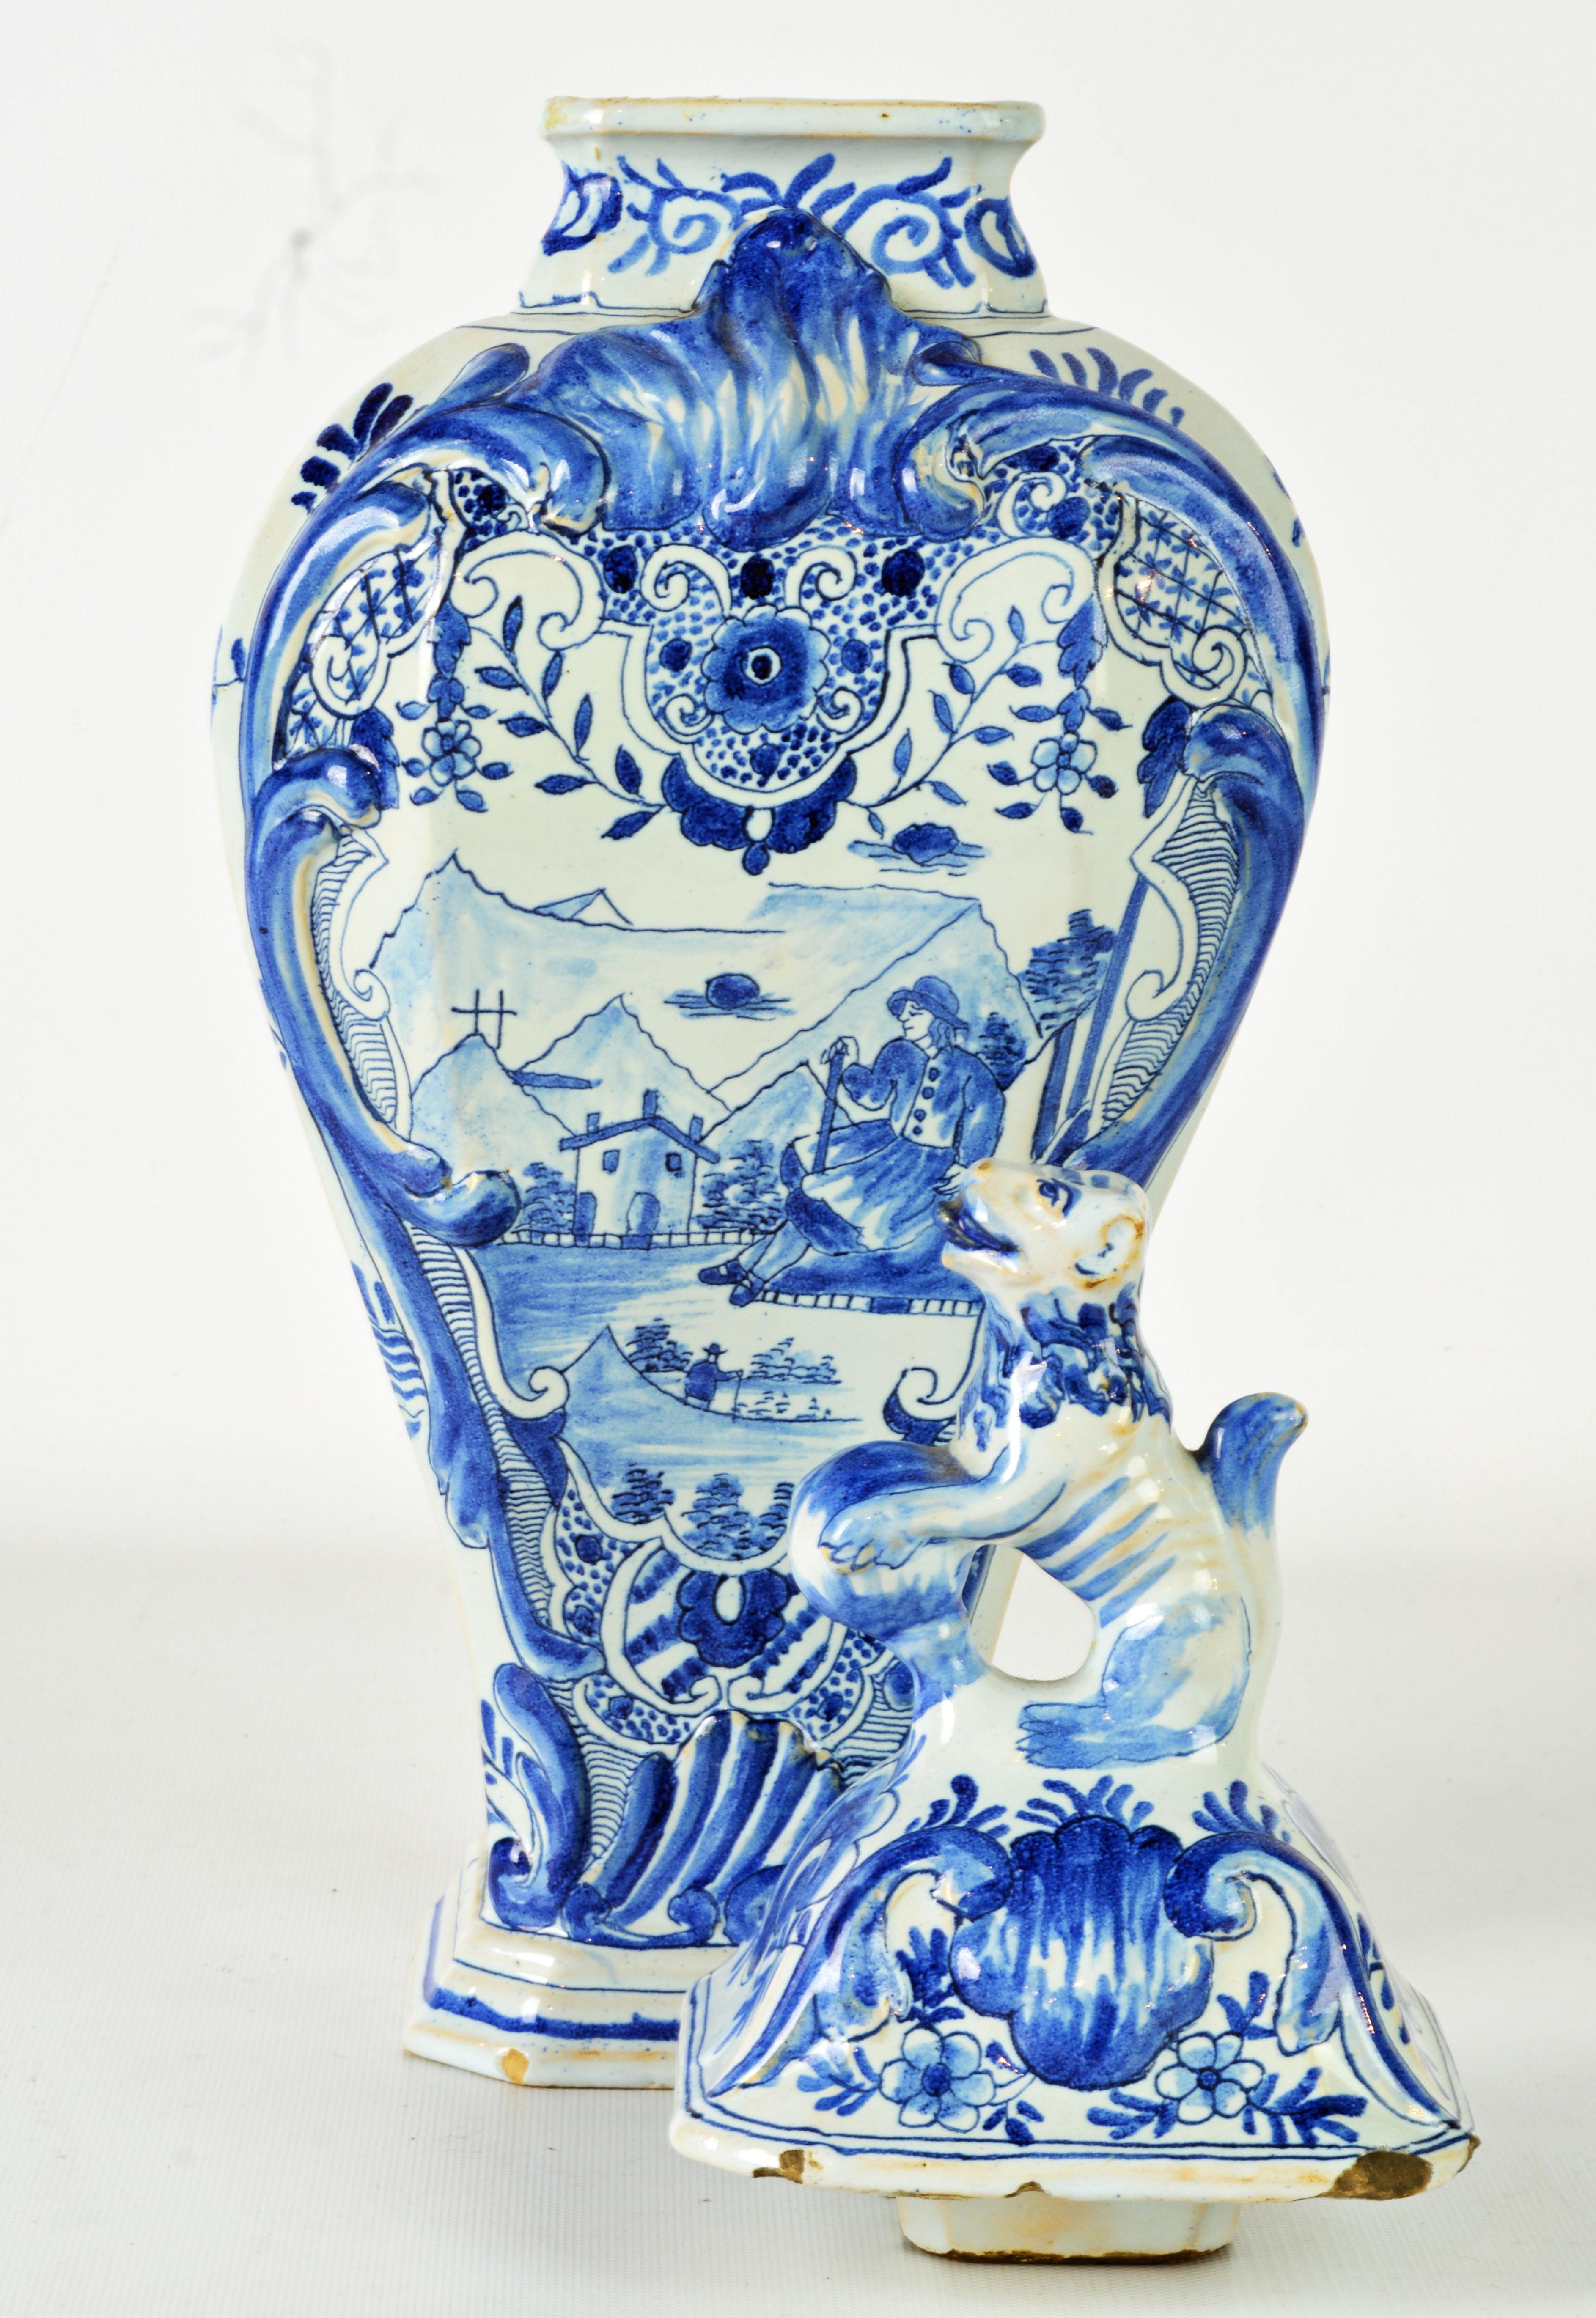 Glazed Blue and White 18th Century Delft Pottery Covered Octagonal Jar with Lion Finial